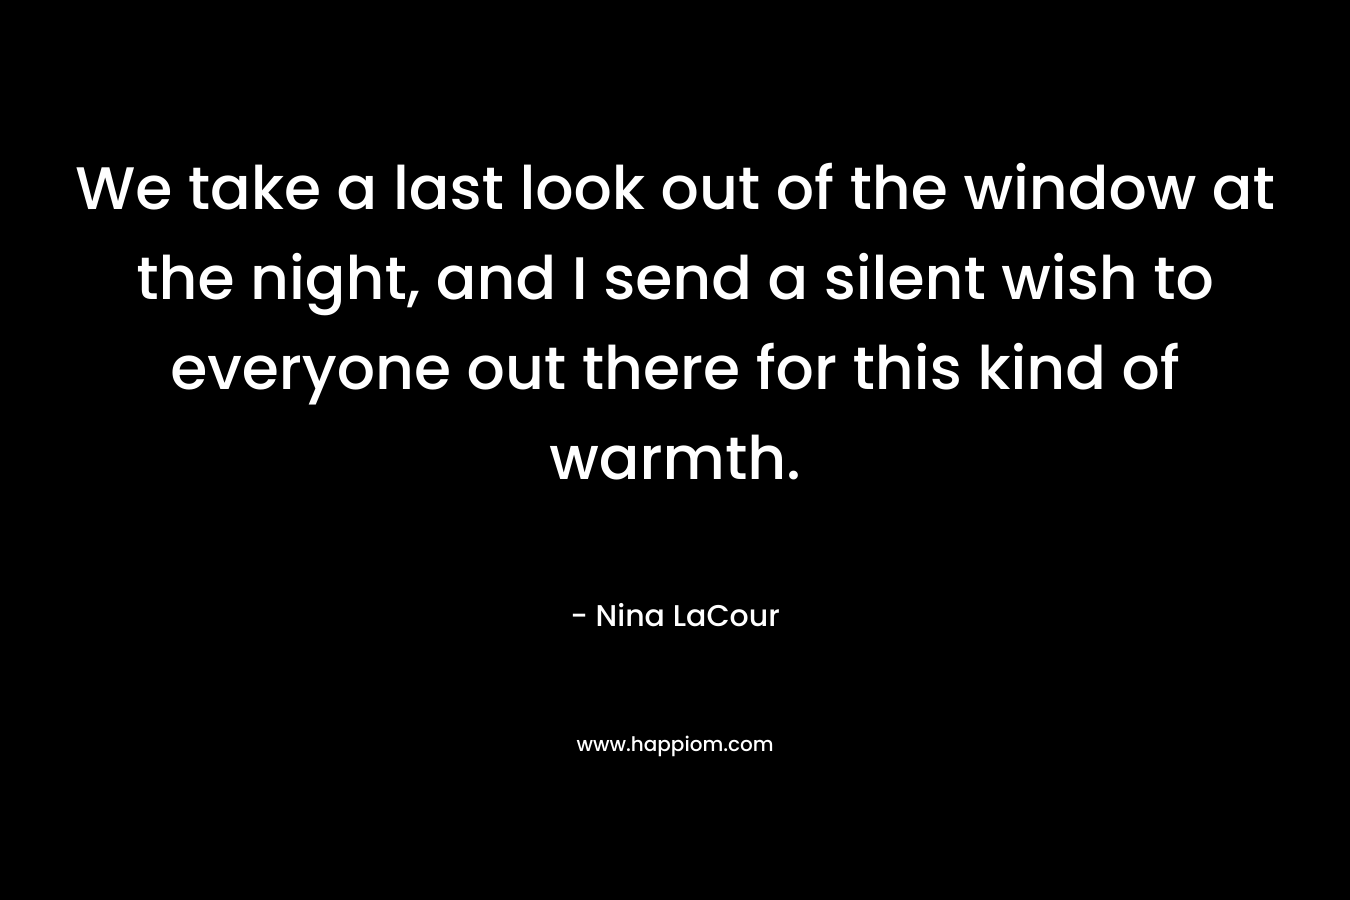 We take a last look out of the window at the night, and I send a silent wish to everyone out there for this kind of warmth.